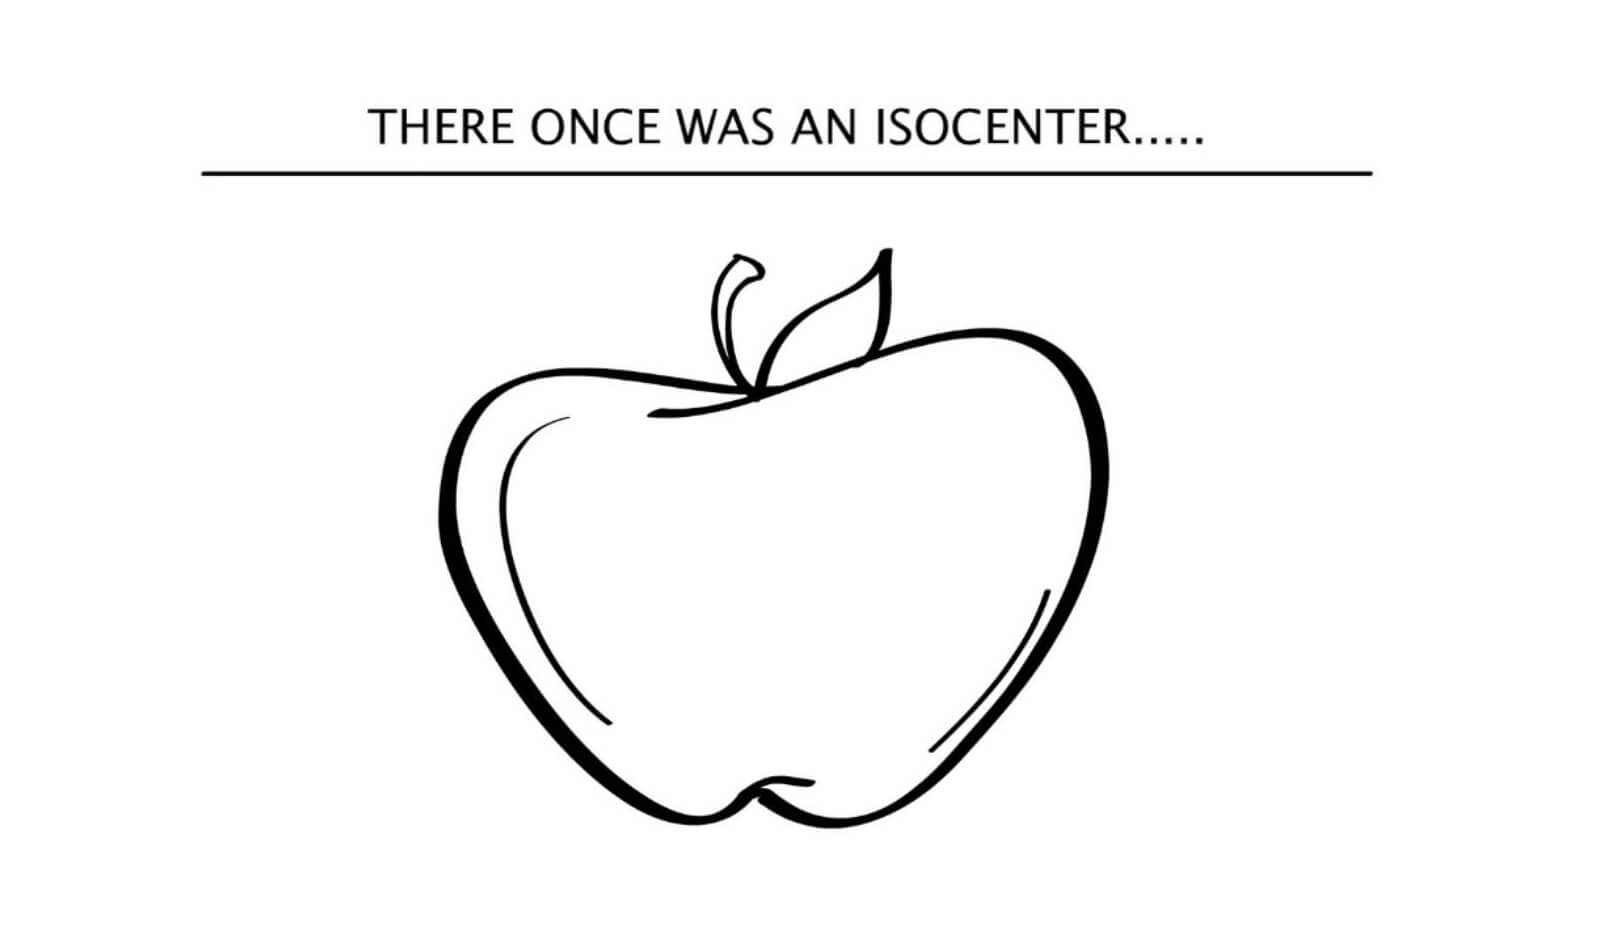 There once was an isocenter... (Picture an apple.)